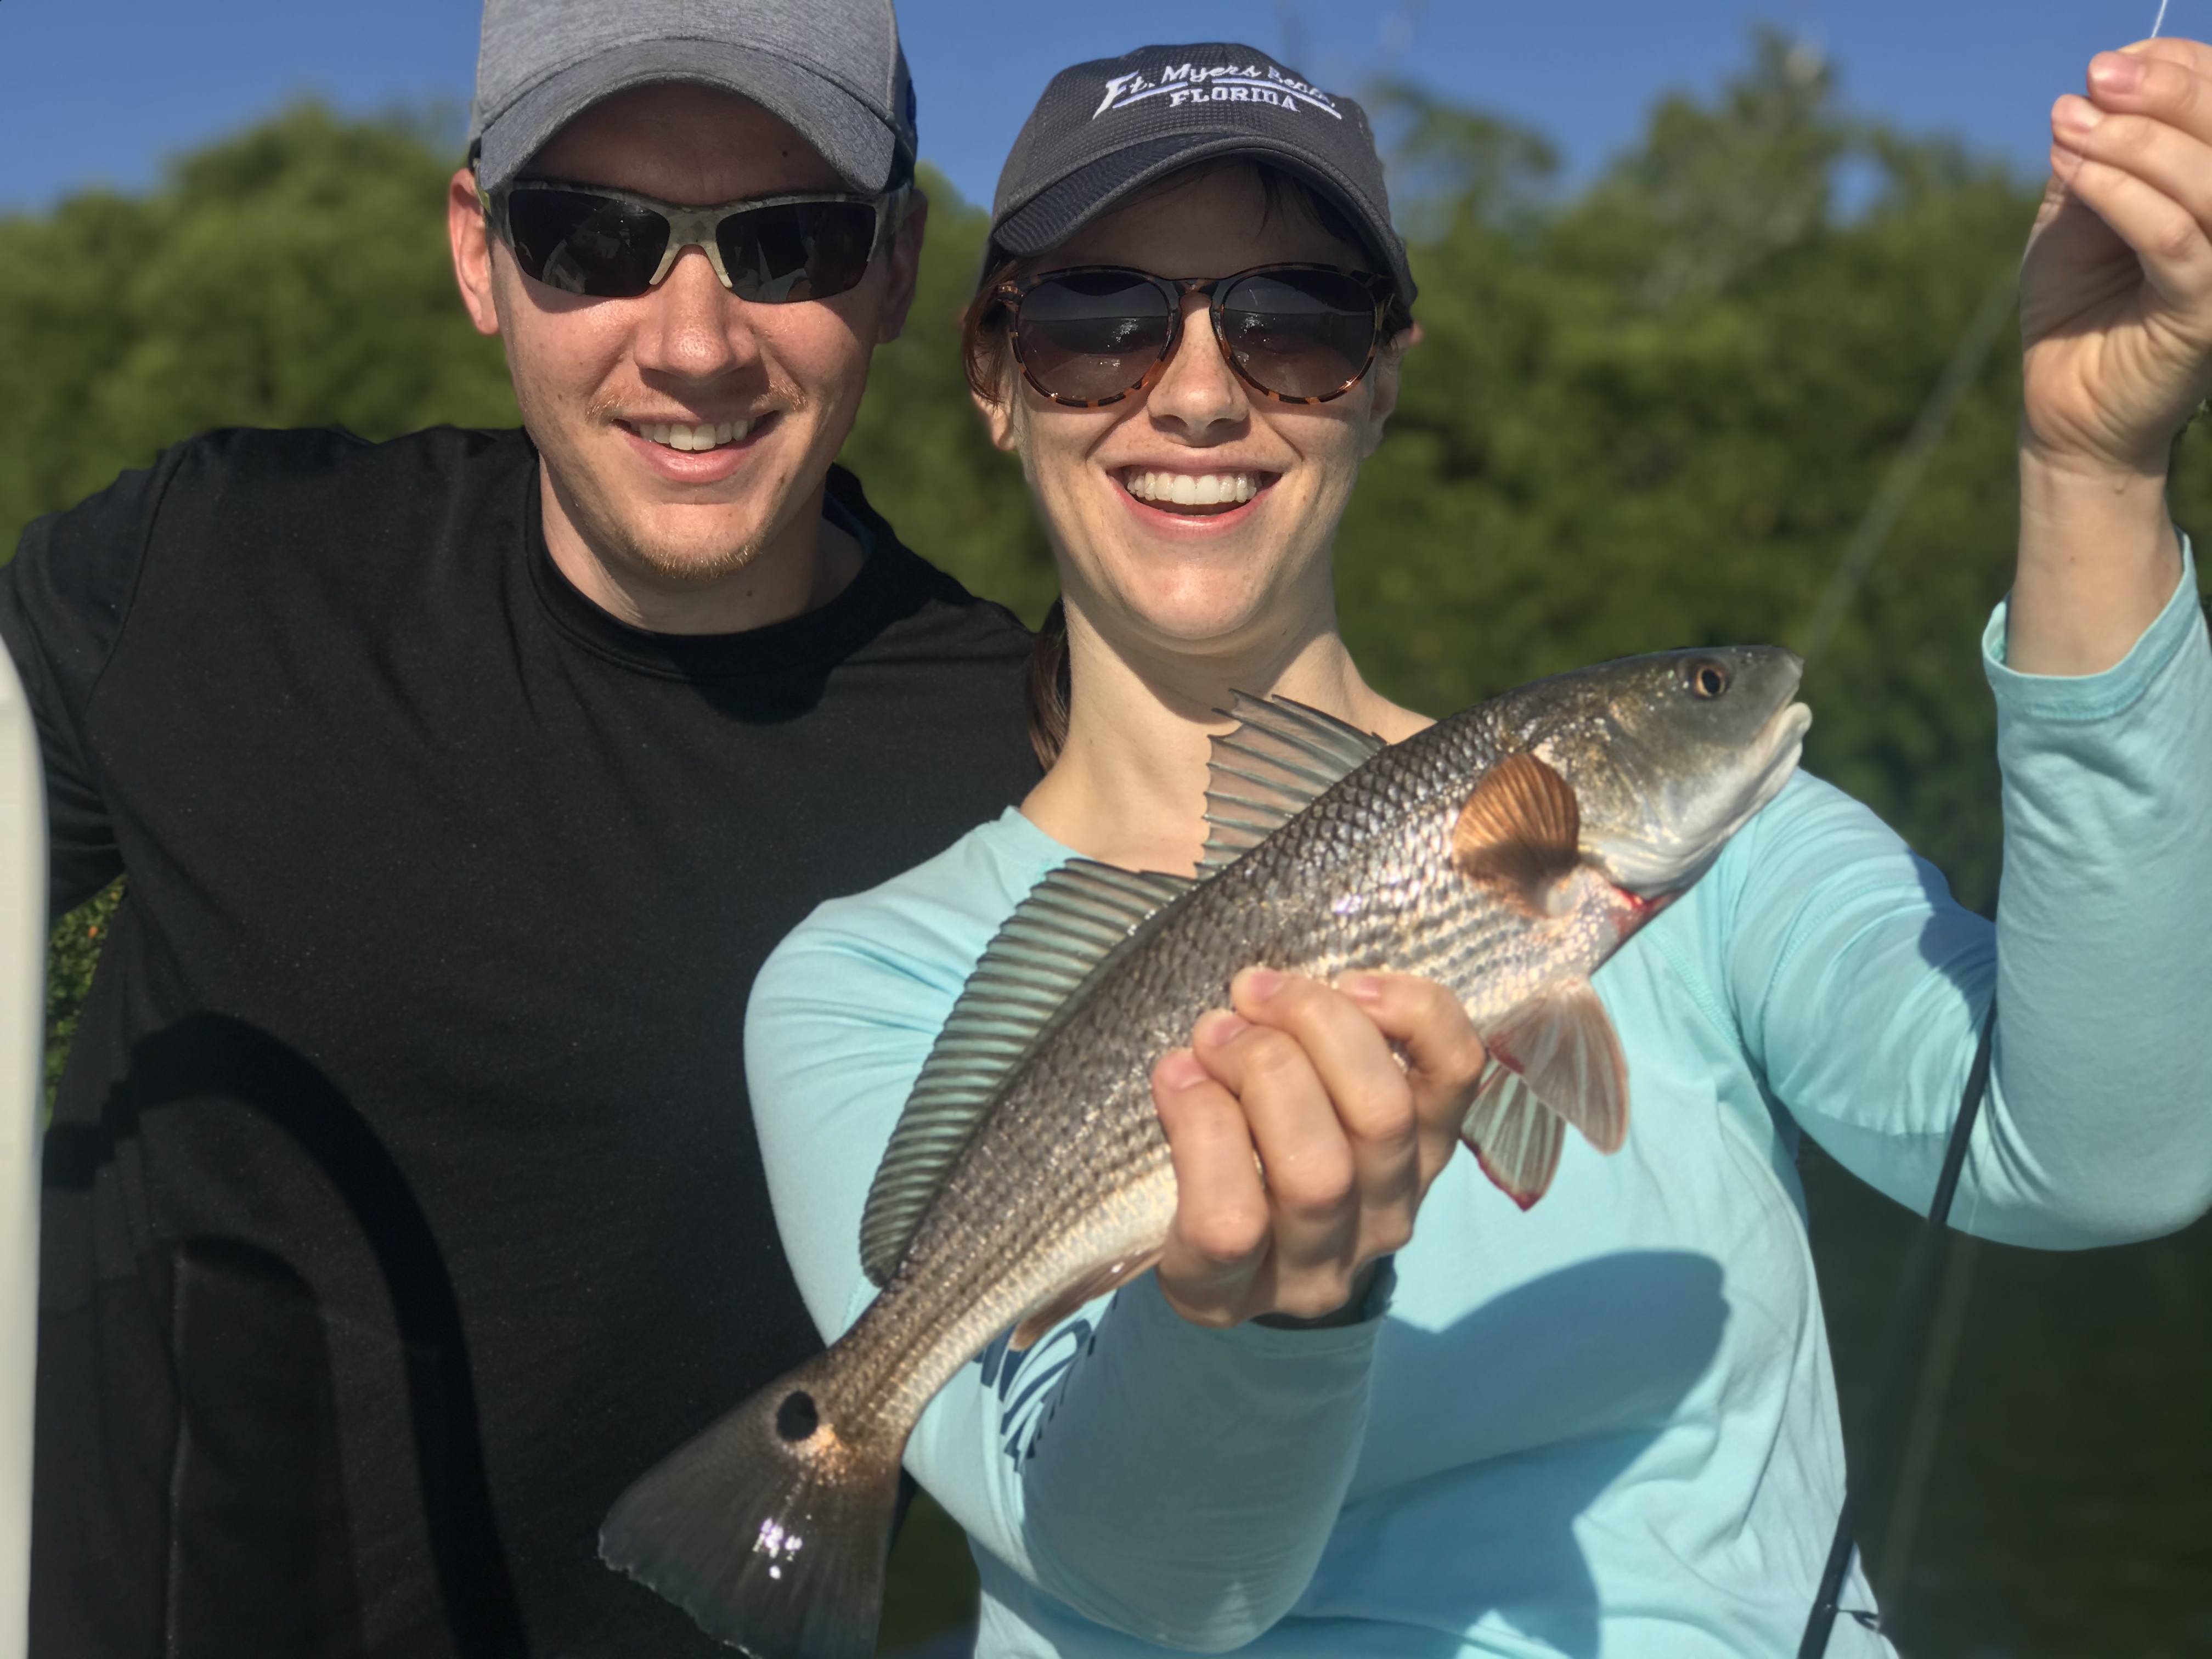 Steve and Ashley with her Redfish catch